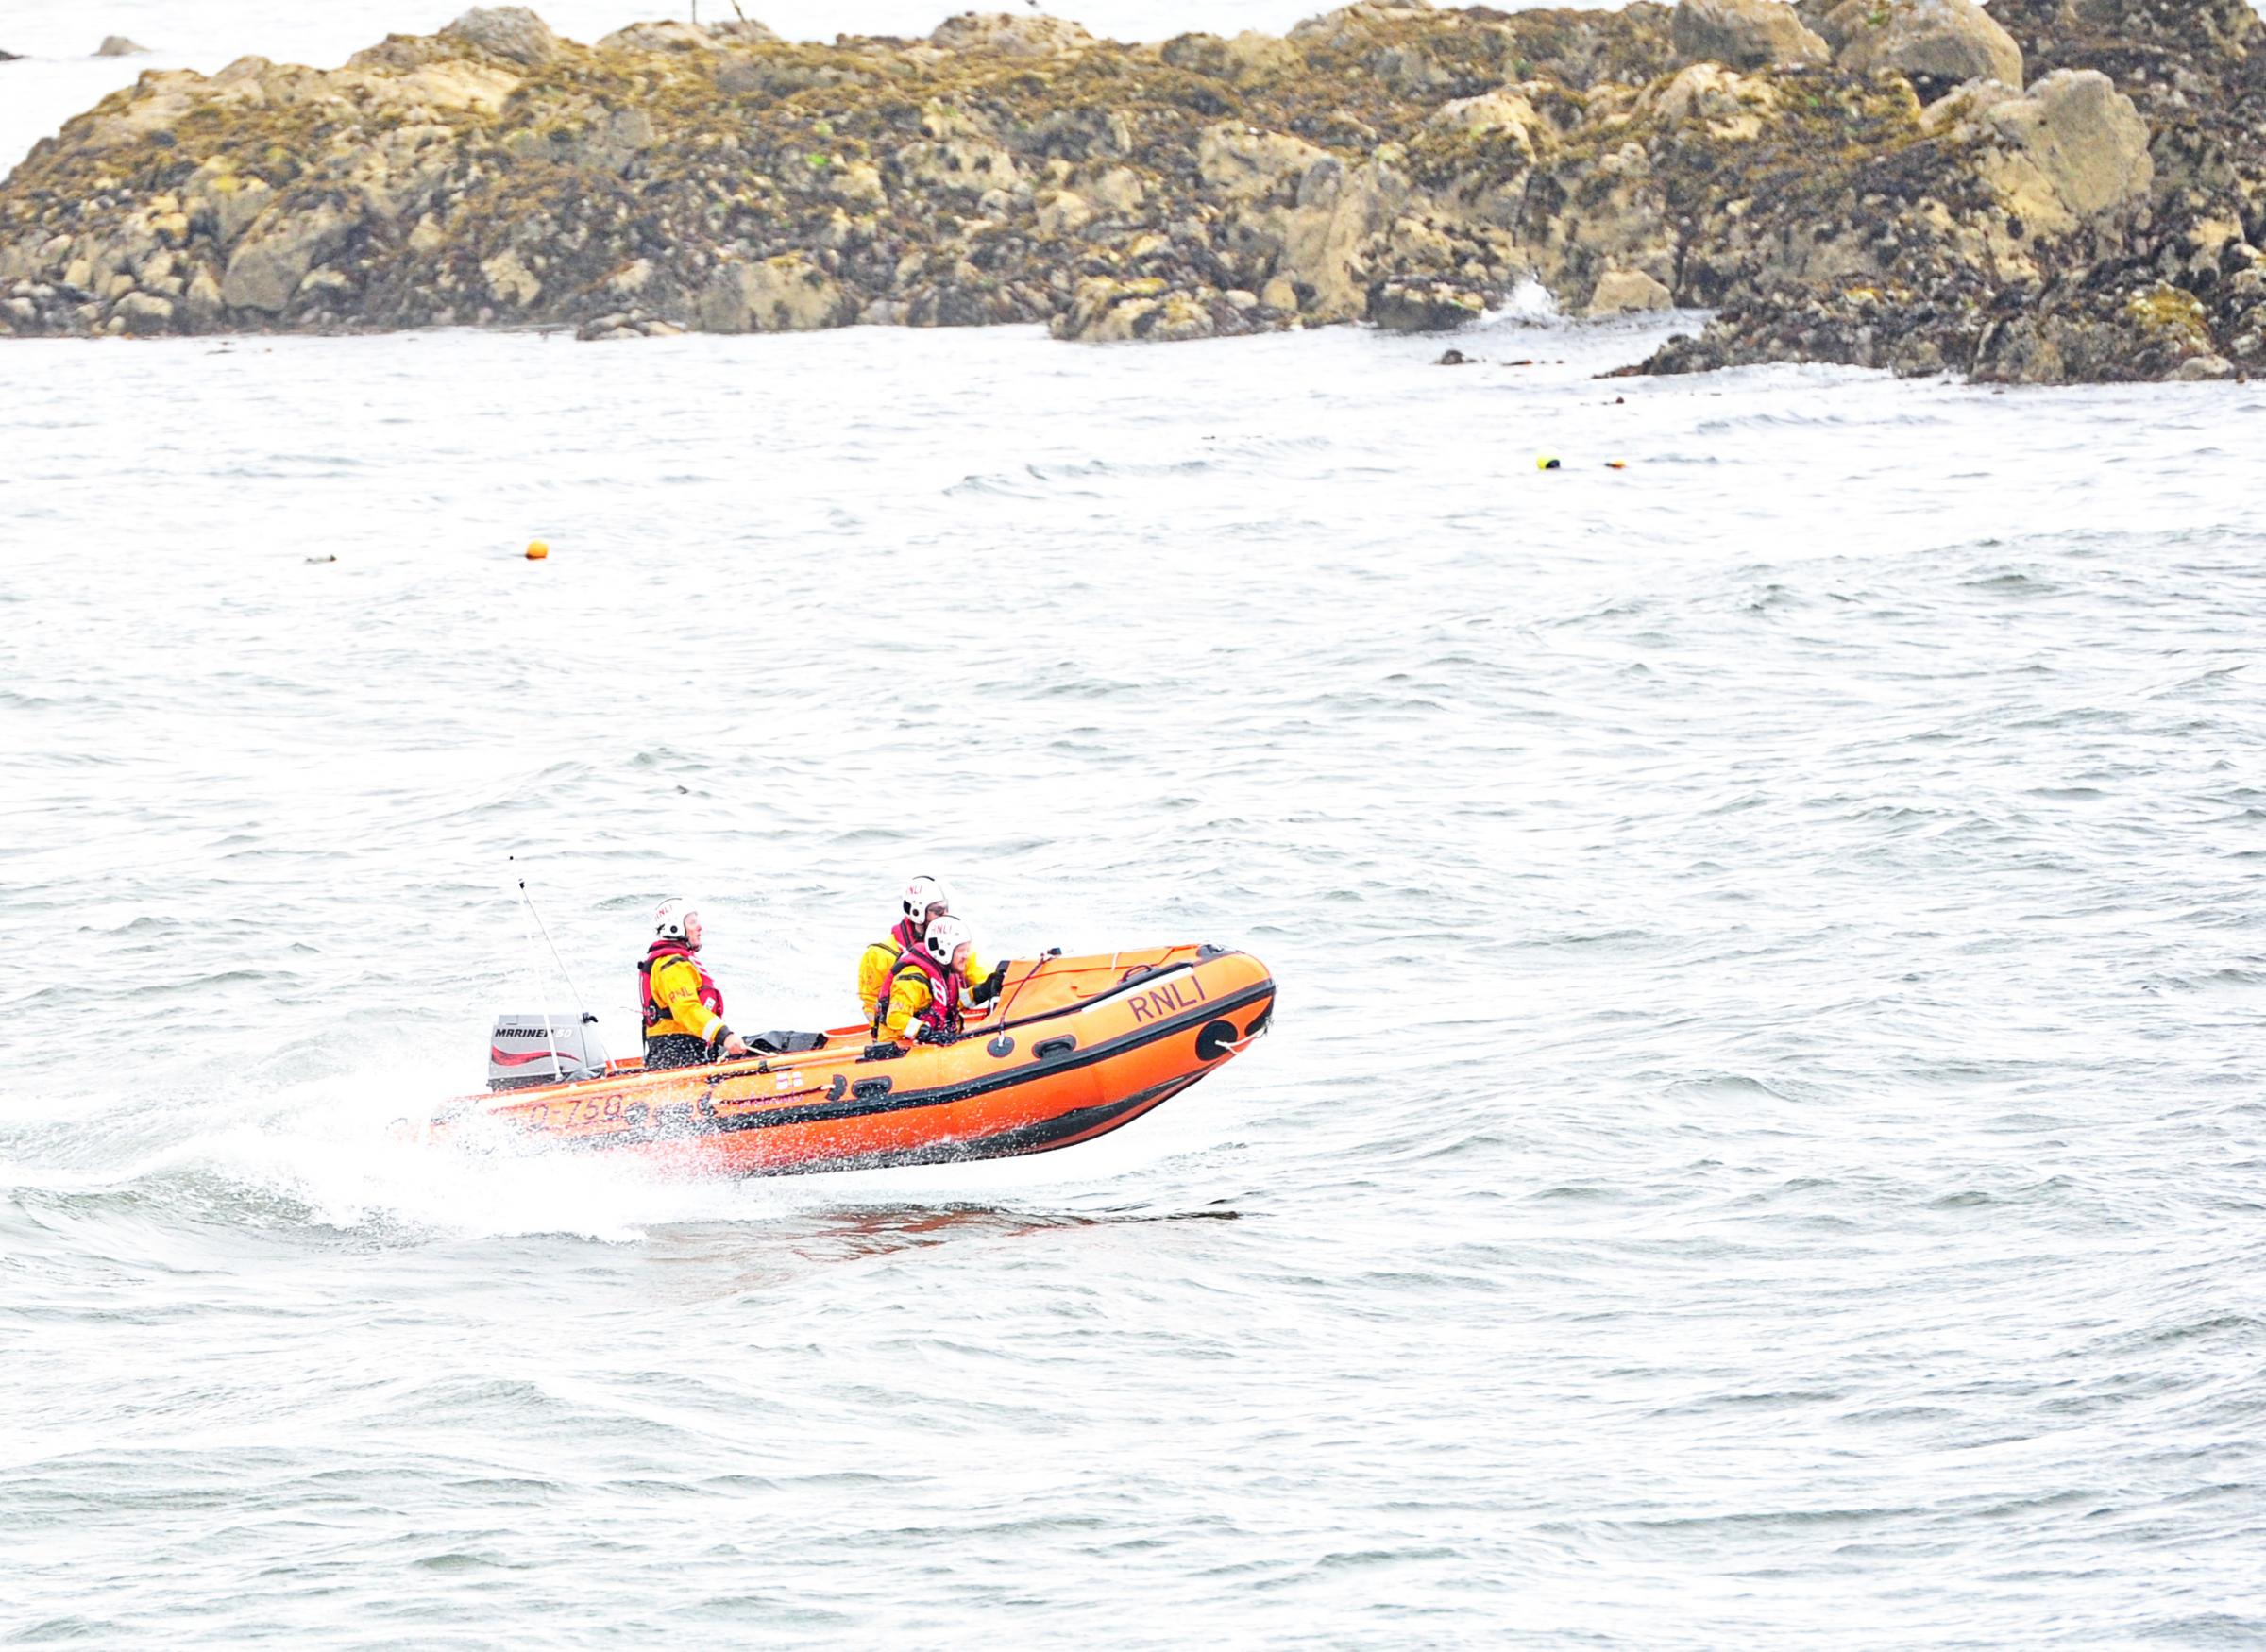 North Berwick Lifeboat goes to aid of tangled boat - East Lothian Courier